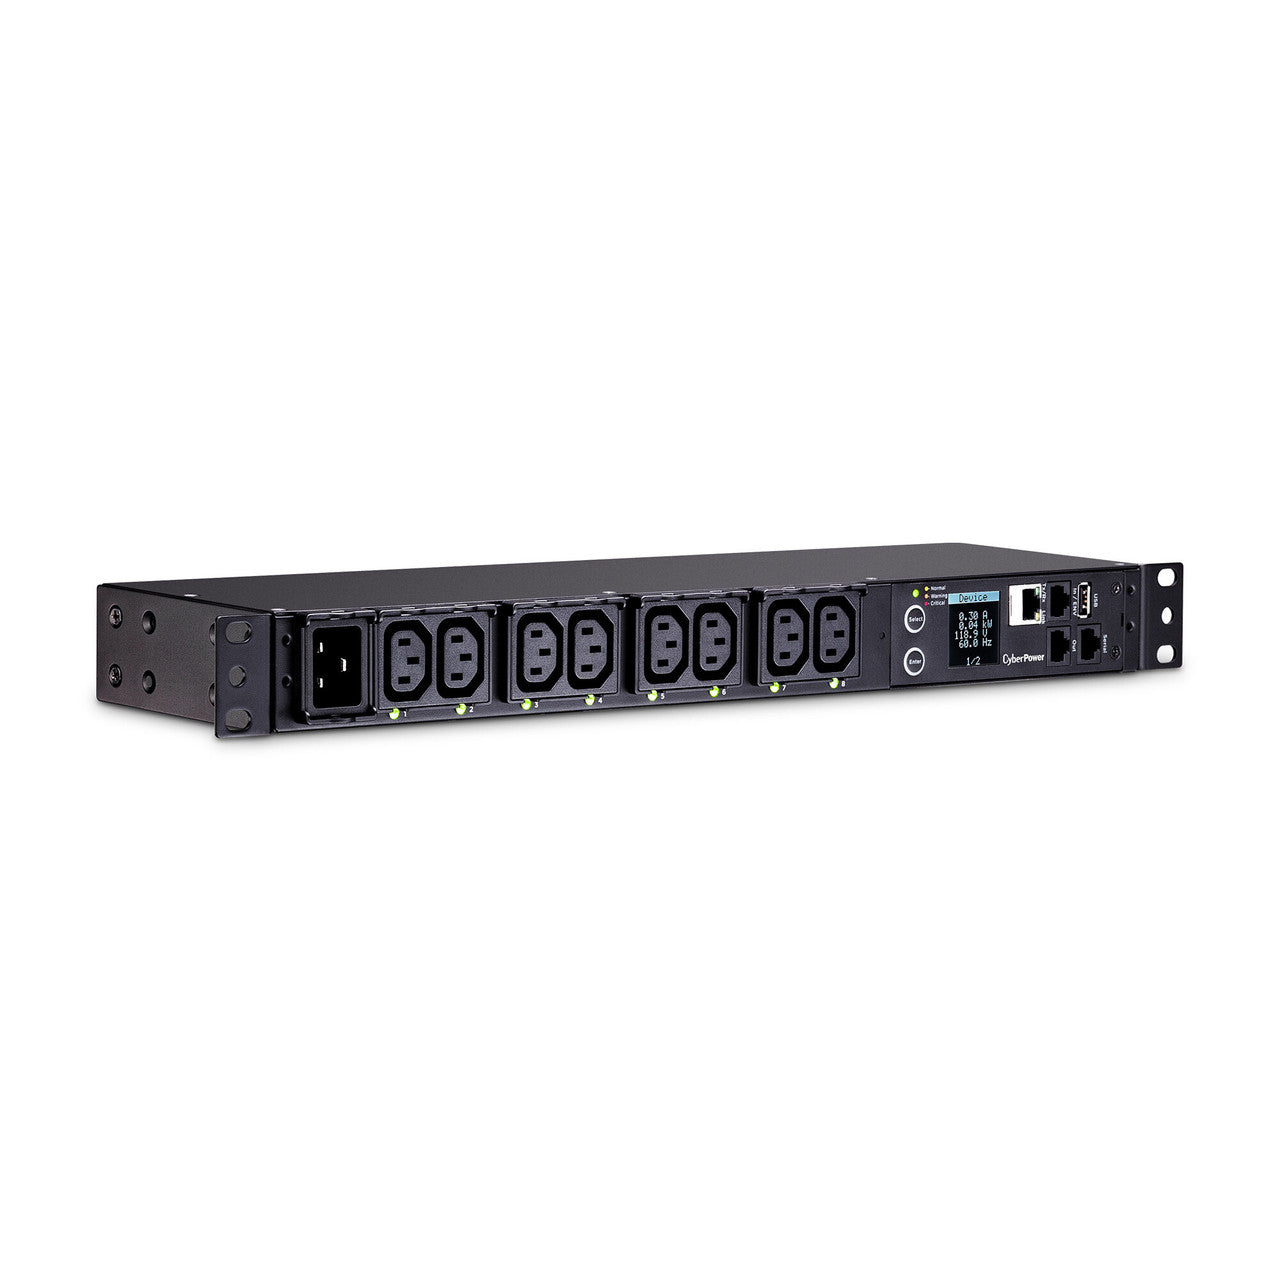 CyberPower PDU81005 SW MBO PDU 20A 100-240V Metered-by-Outlet Switched PDU 8 C13 Outlets 10ft cord 3yr Warranty